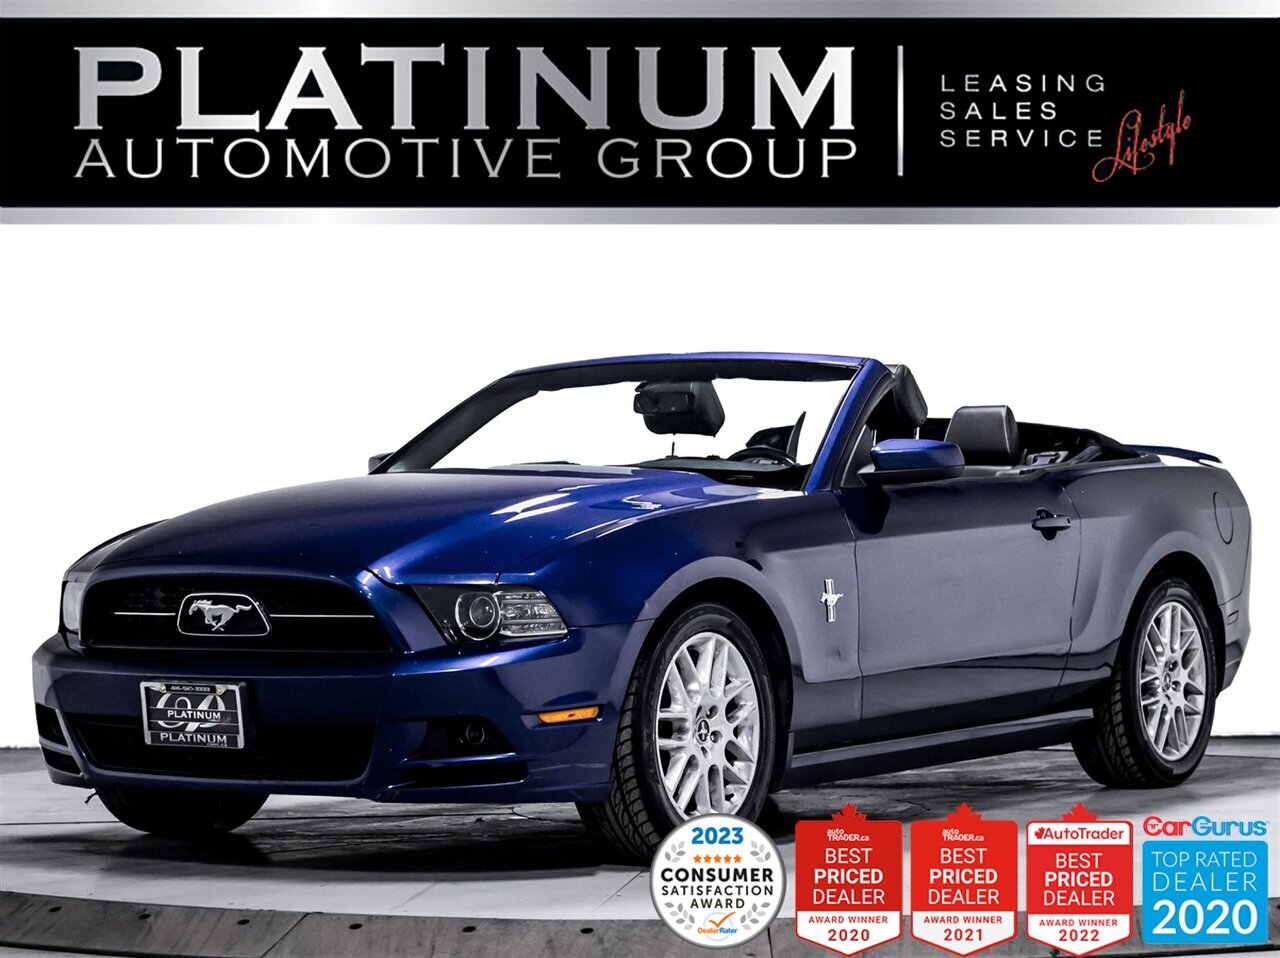 2014 Ford Mustang V6 PREMIUM,305 HP, CONVERTIBLE,LEATHER,KEYLESS ENT